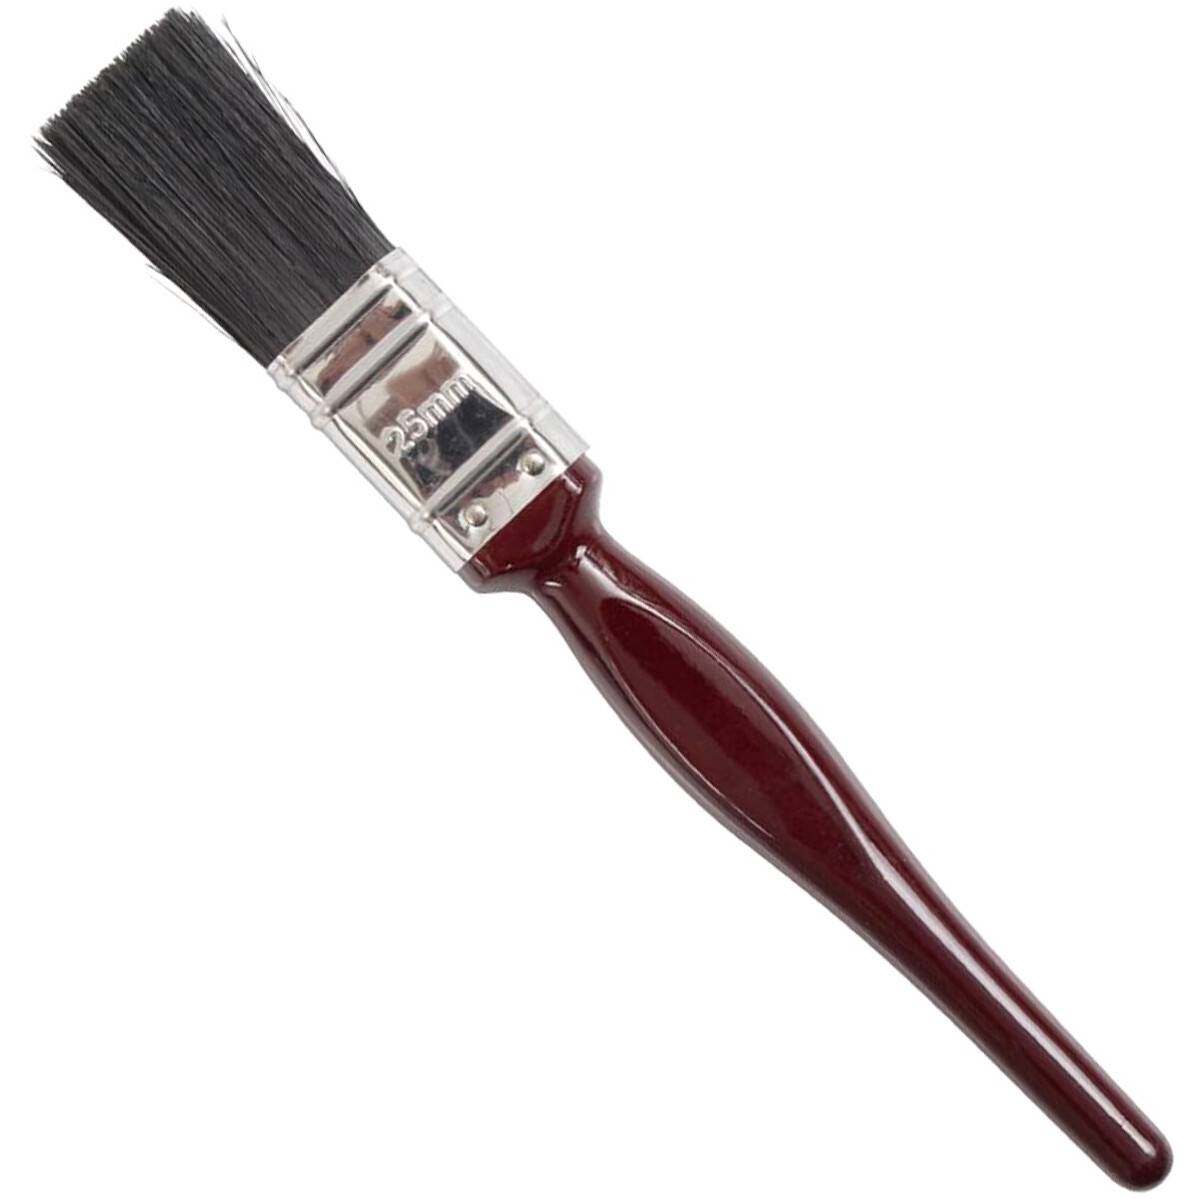 The Paint Brush Cover #PBC001 Keep brushes wet for up to 30 days NEW